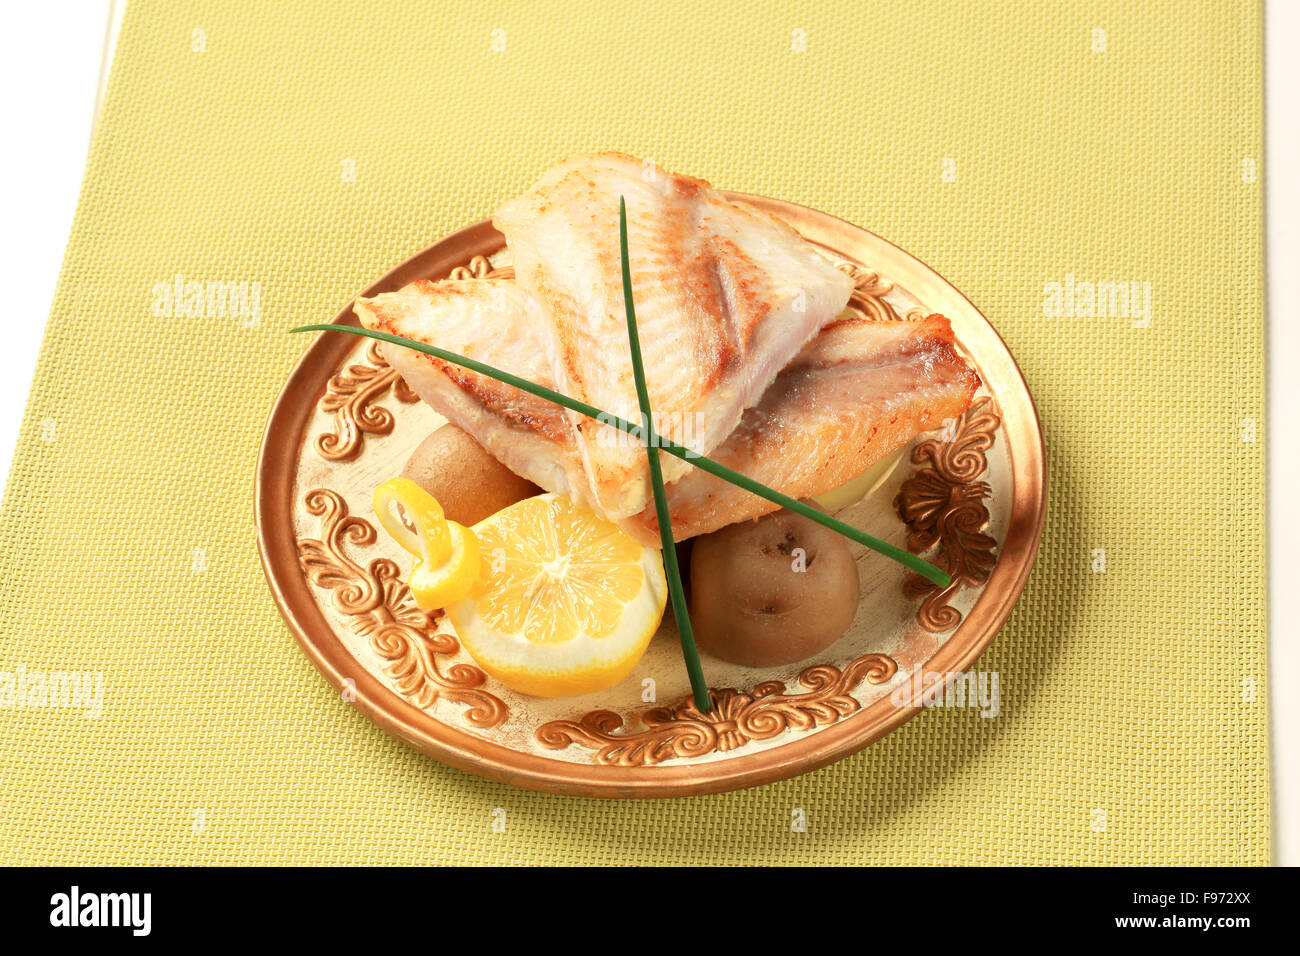 Pan fried fish fillets with new potatoes and lemon Stock Photo